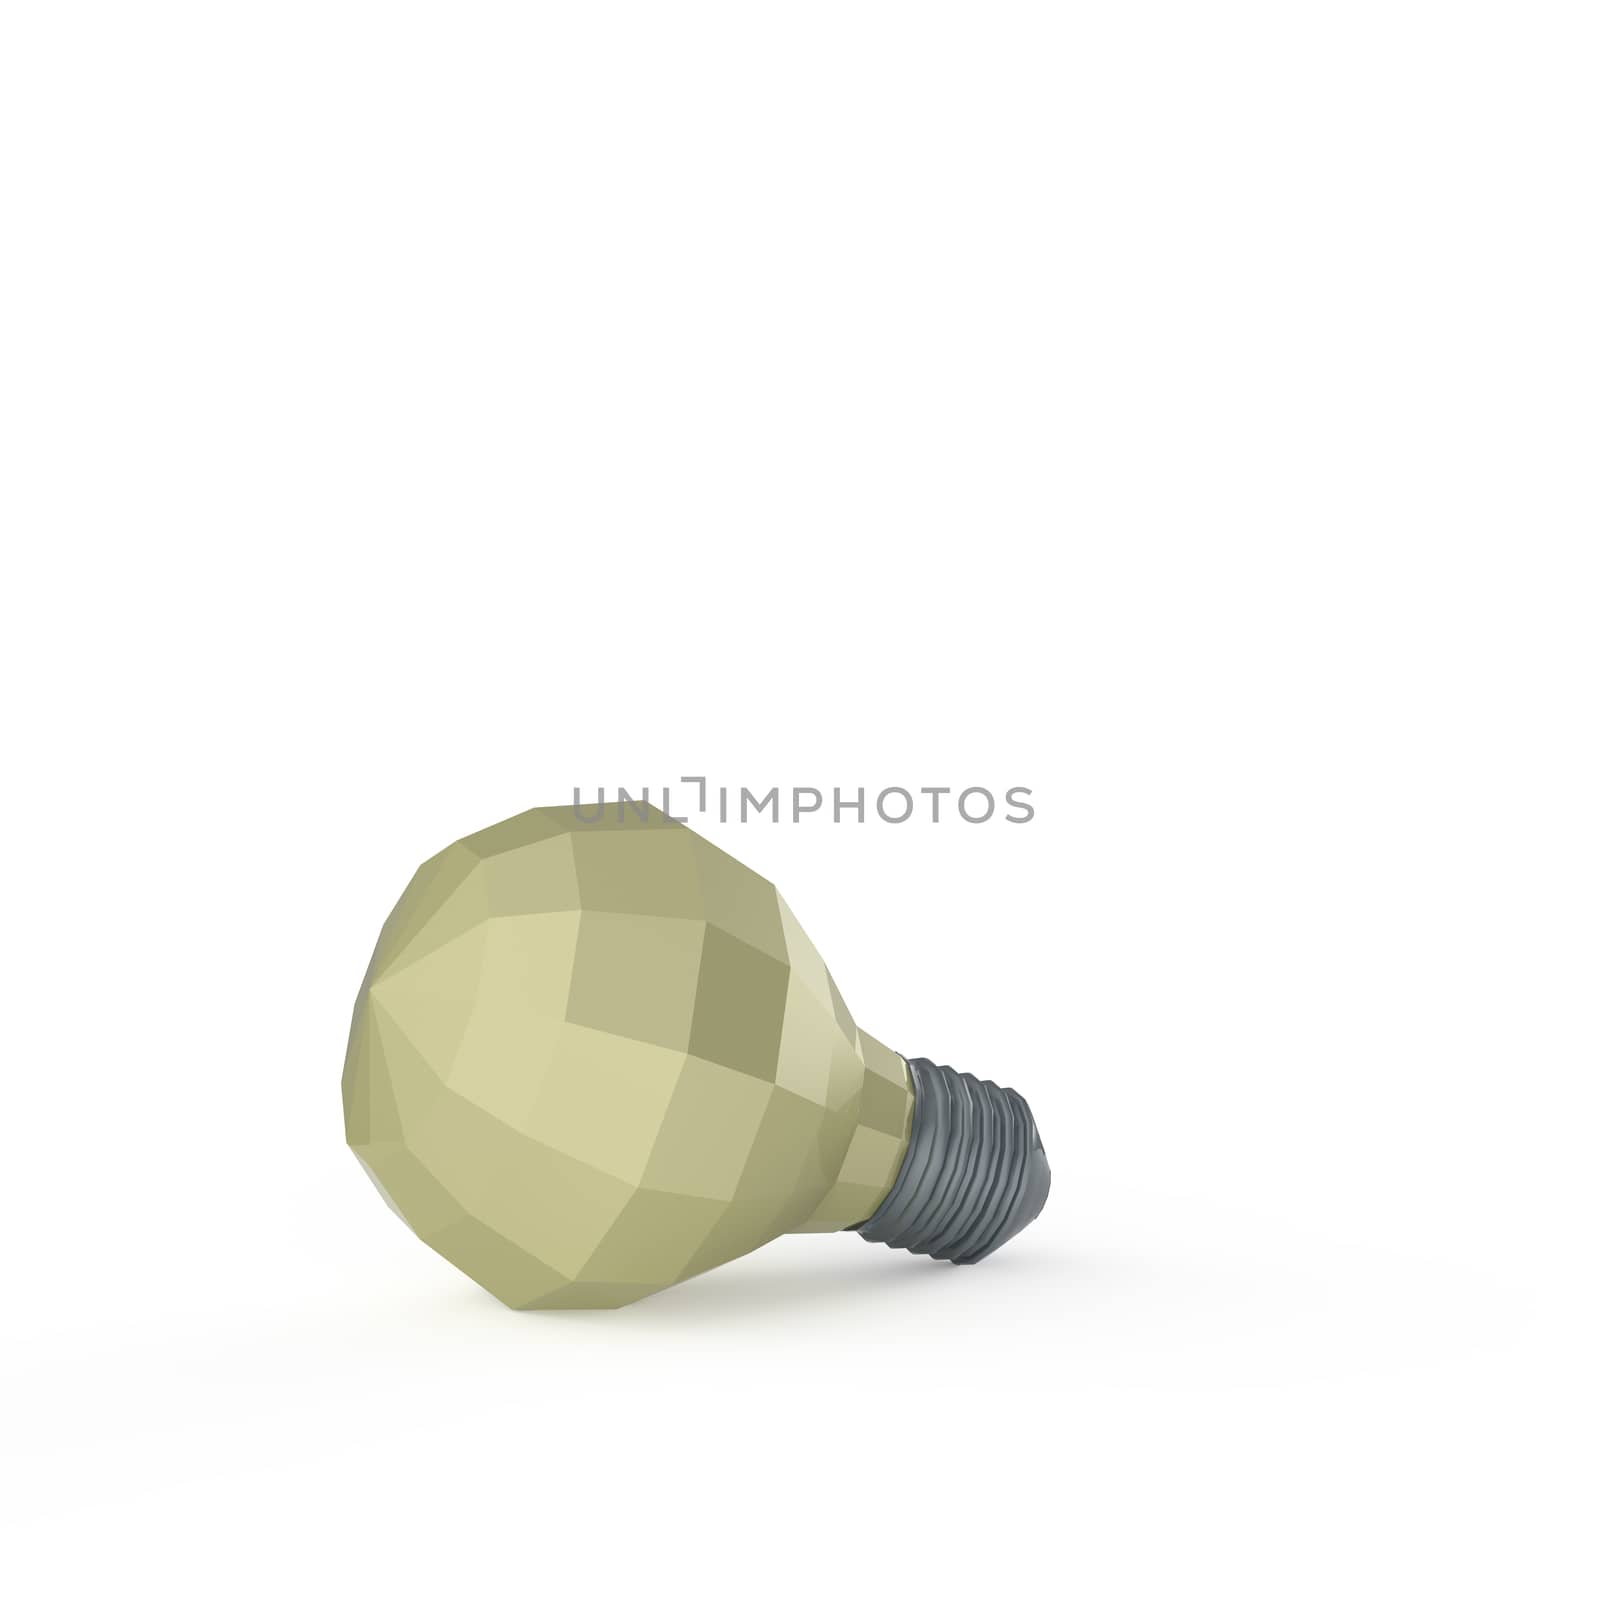 low polygonal 3d light bulb concept symbol by everythingpossible